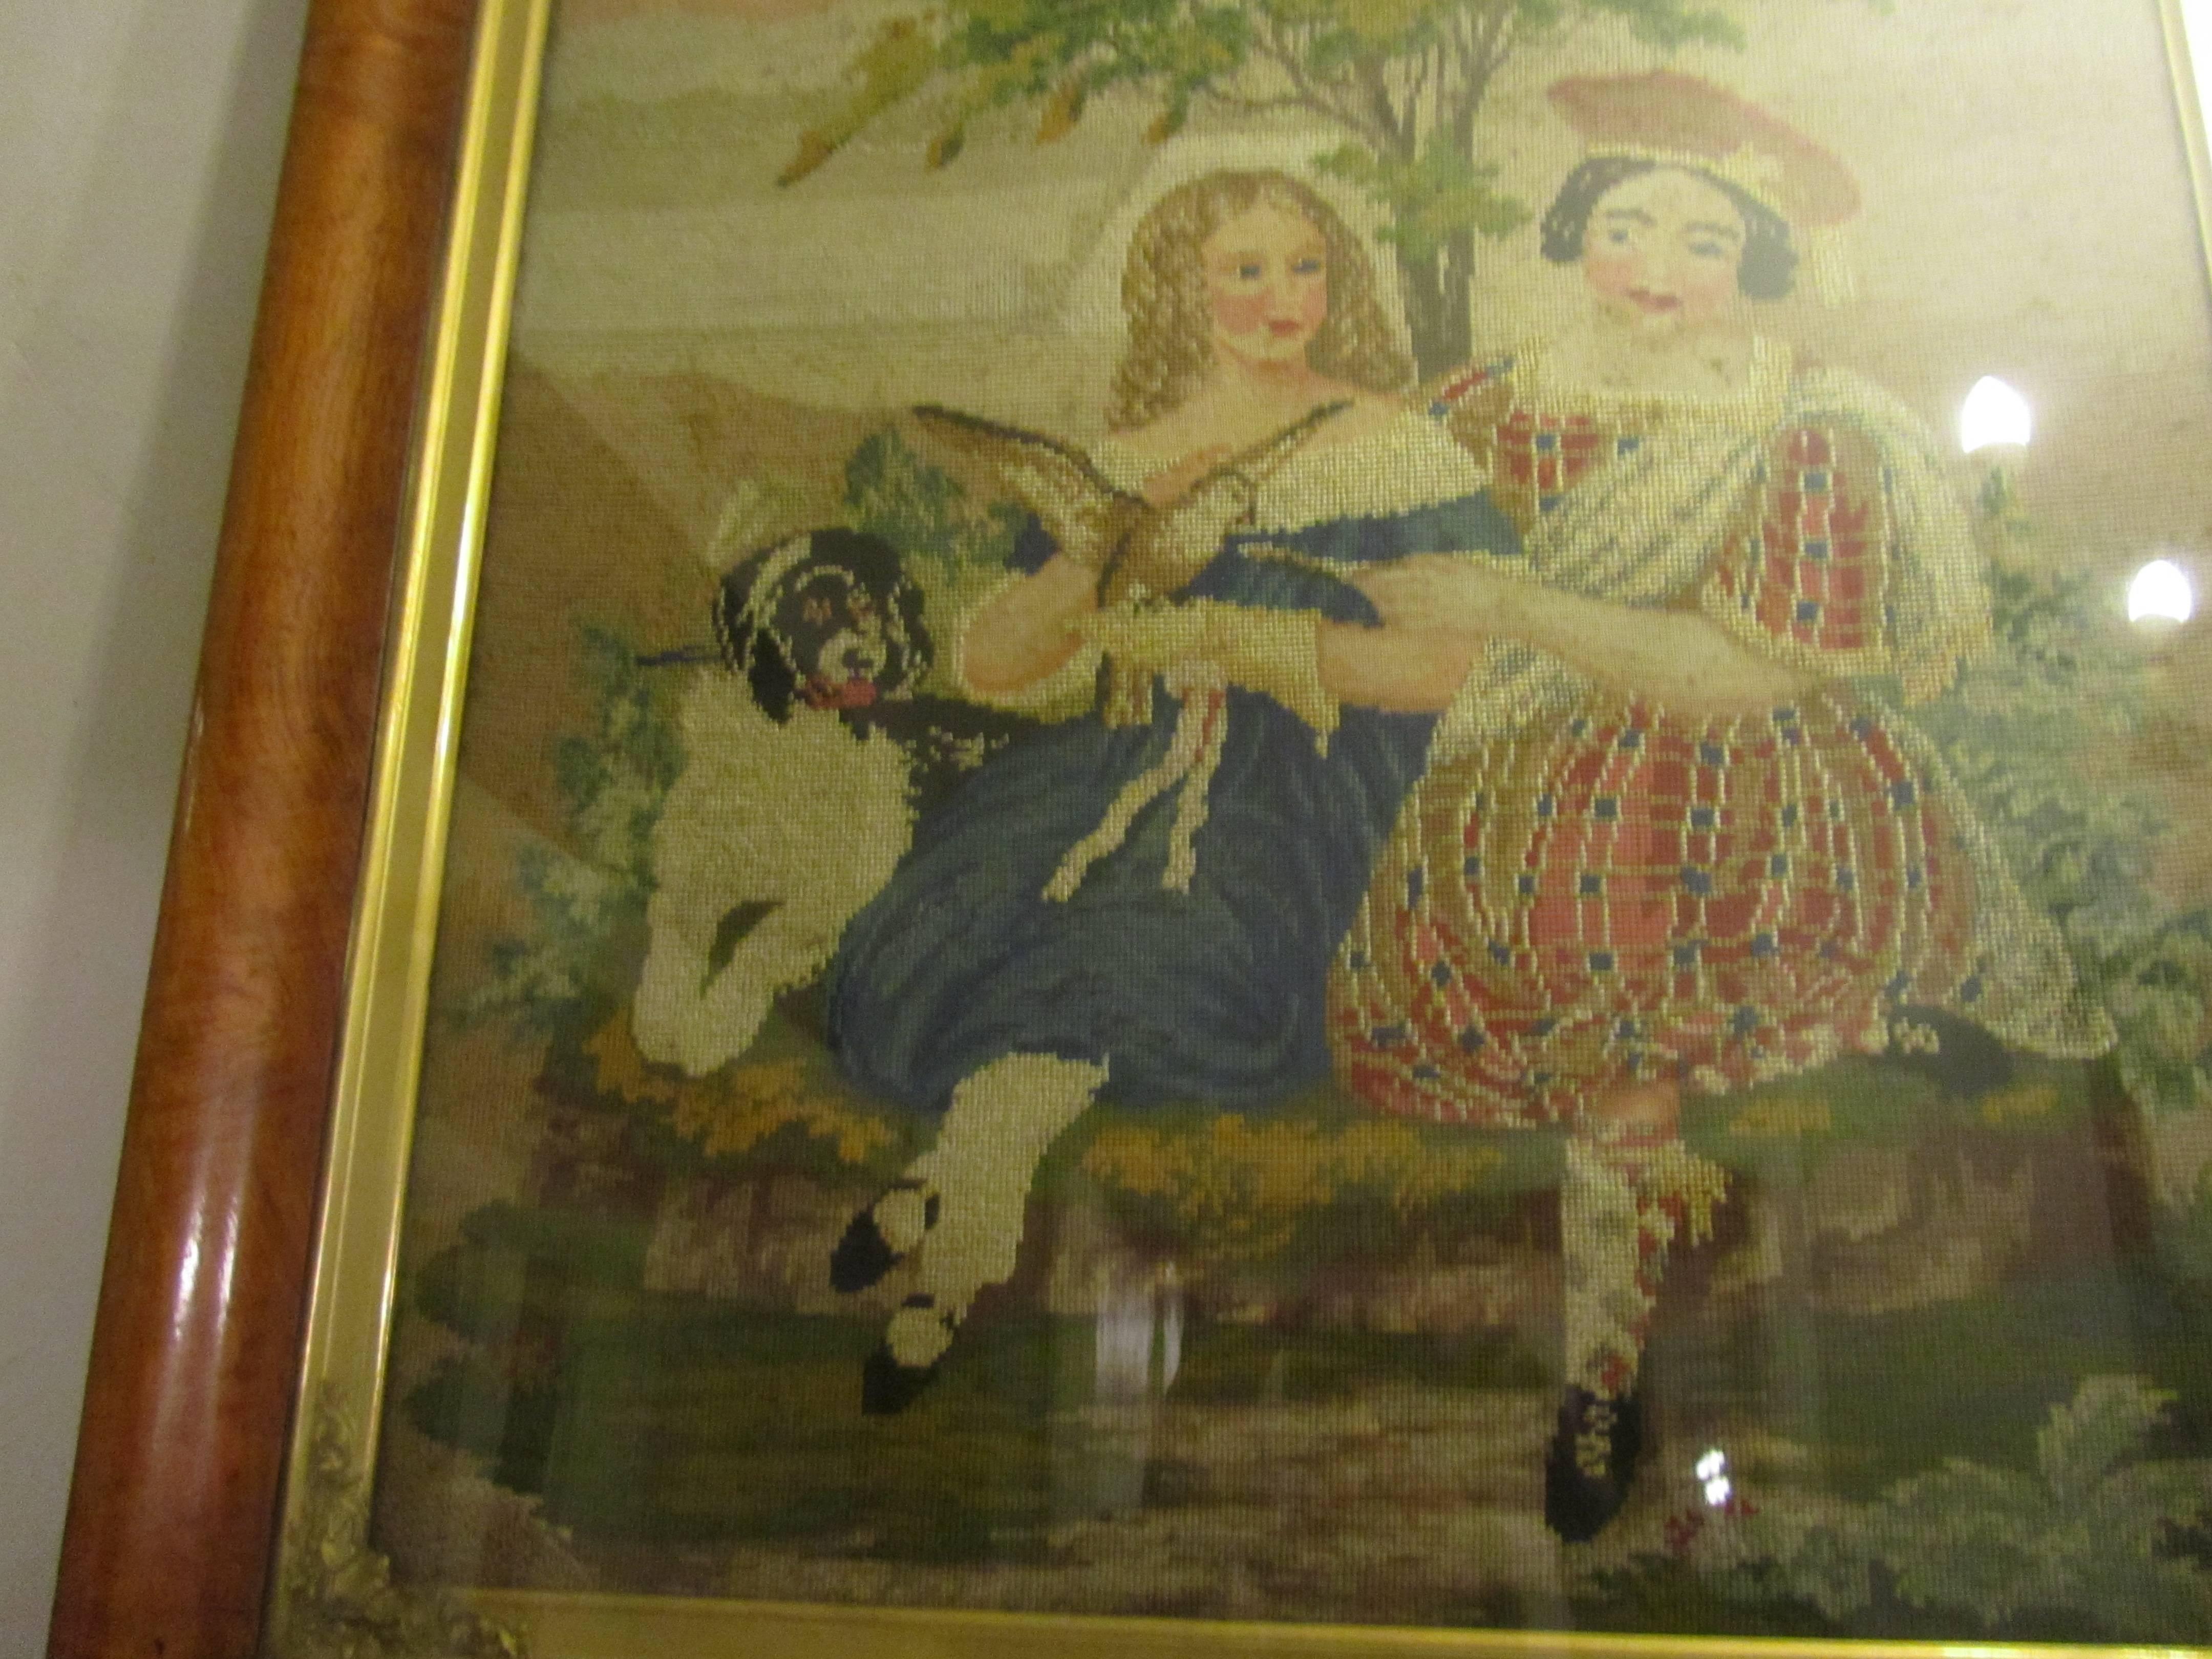 19th century framed Scottish tapestry

This is a charming 19th century framed Scottish tapestry
The tapestry dates from approximately 1850 it is handwoven in wool and silk, it is in its original Maple Frame which has protected it very well.
The